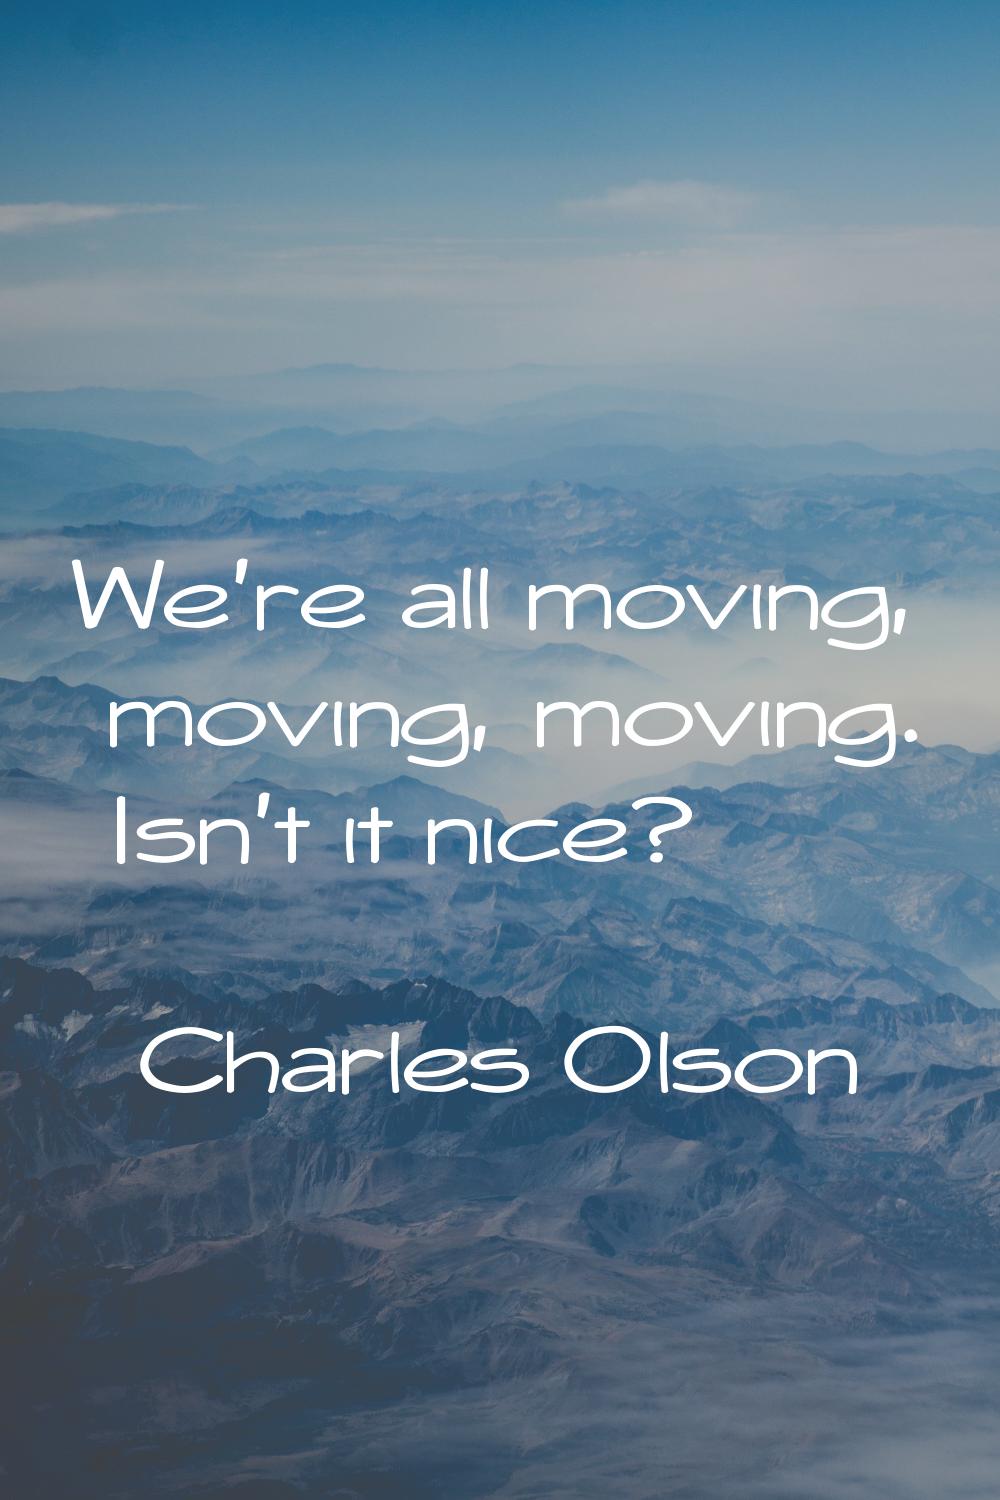 We're all moving, moving, moving. Isn't it nice?